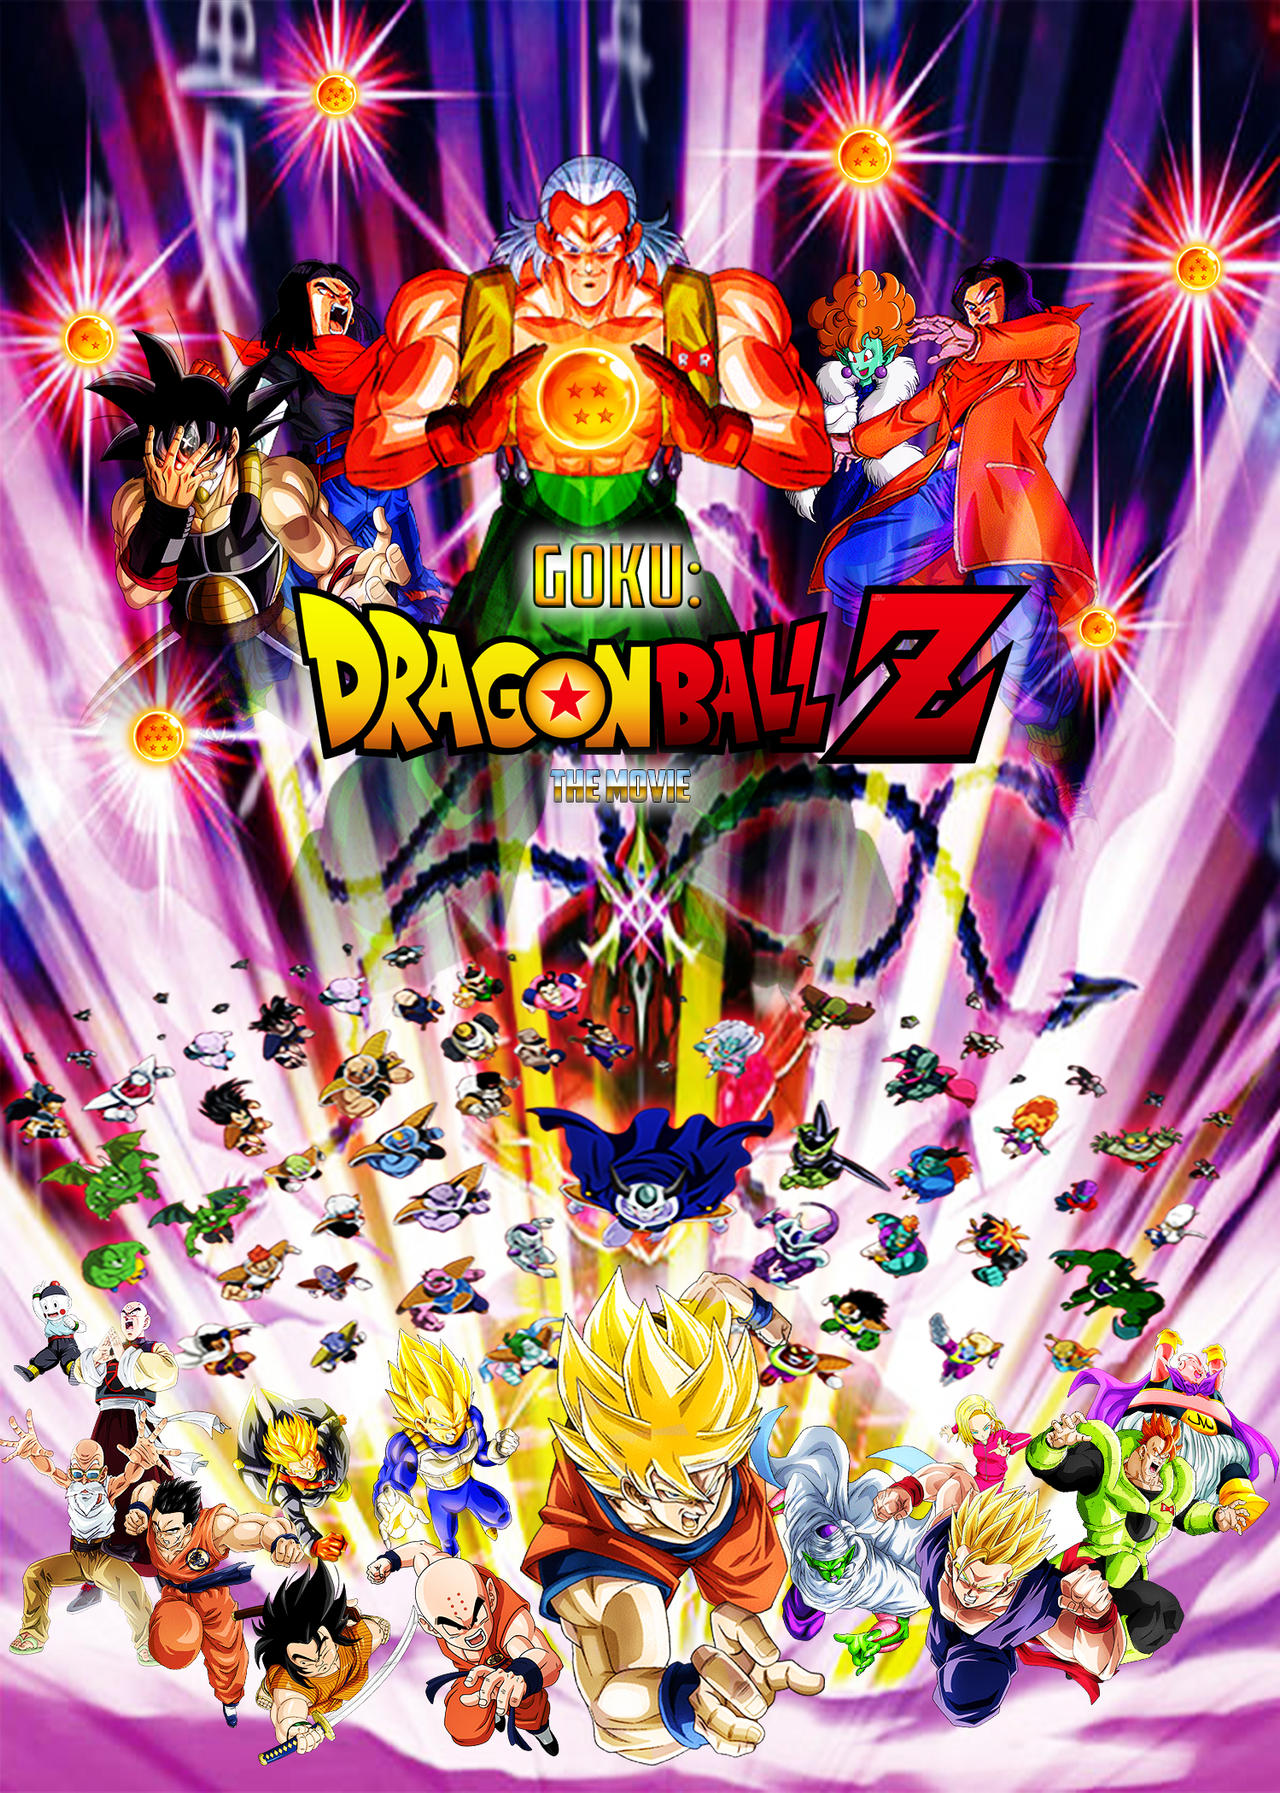 Poster Dragon Ball Z Sagas by Dony910 on DeviantArt